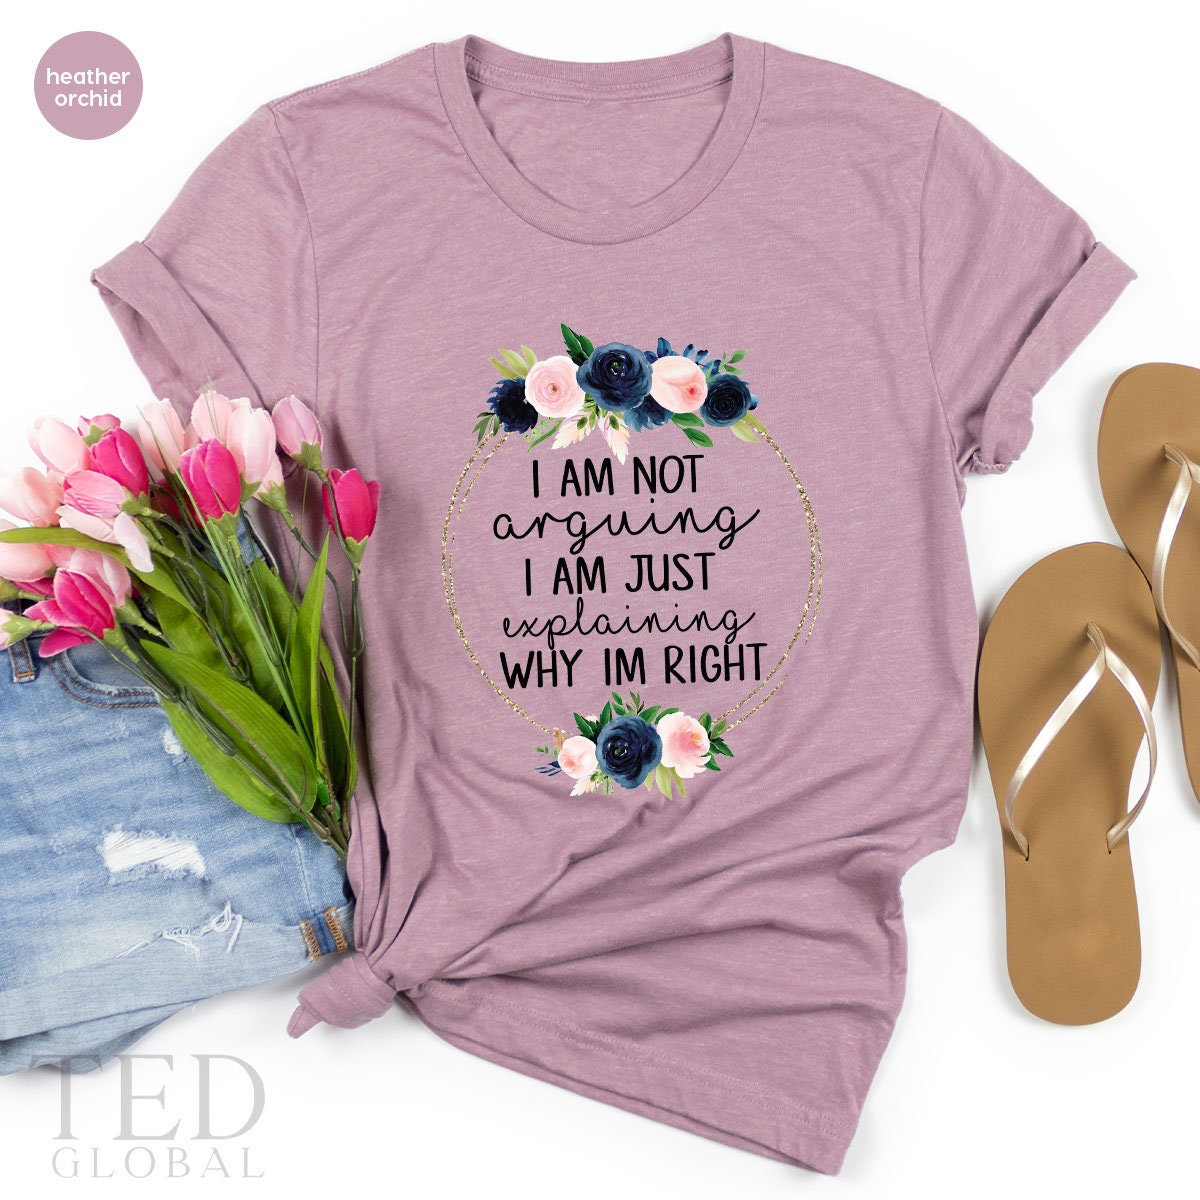 I Am Not Arguing Shirt, Sarcasm T Shirt, Funny Saying T Shirt, Cute Explain Shirts, Humorous Tee, Floral Argumental T-Shirt, Gift For Her - Fastdeliverytees.com